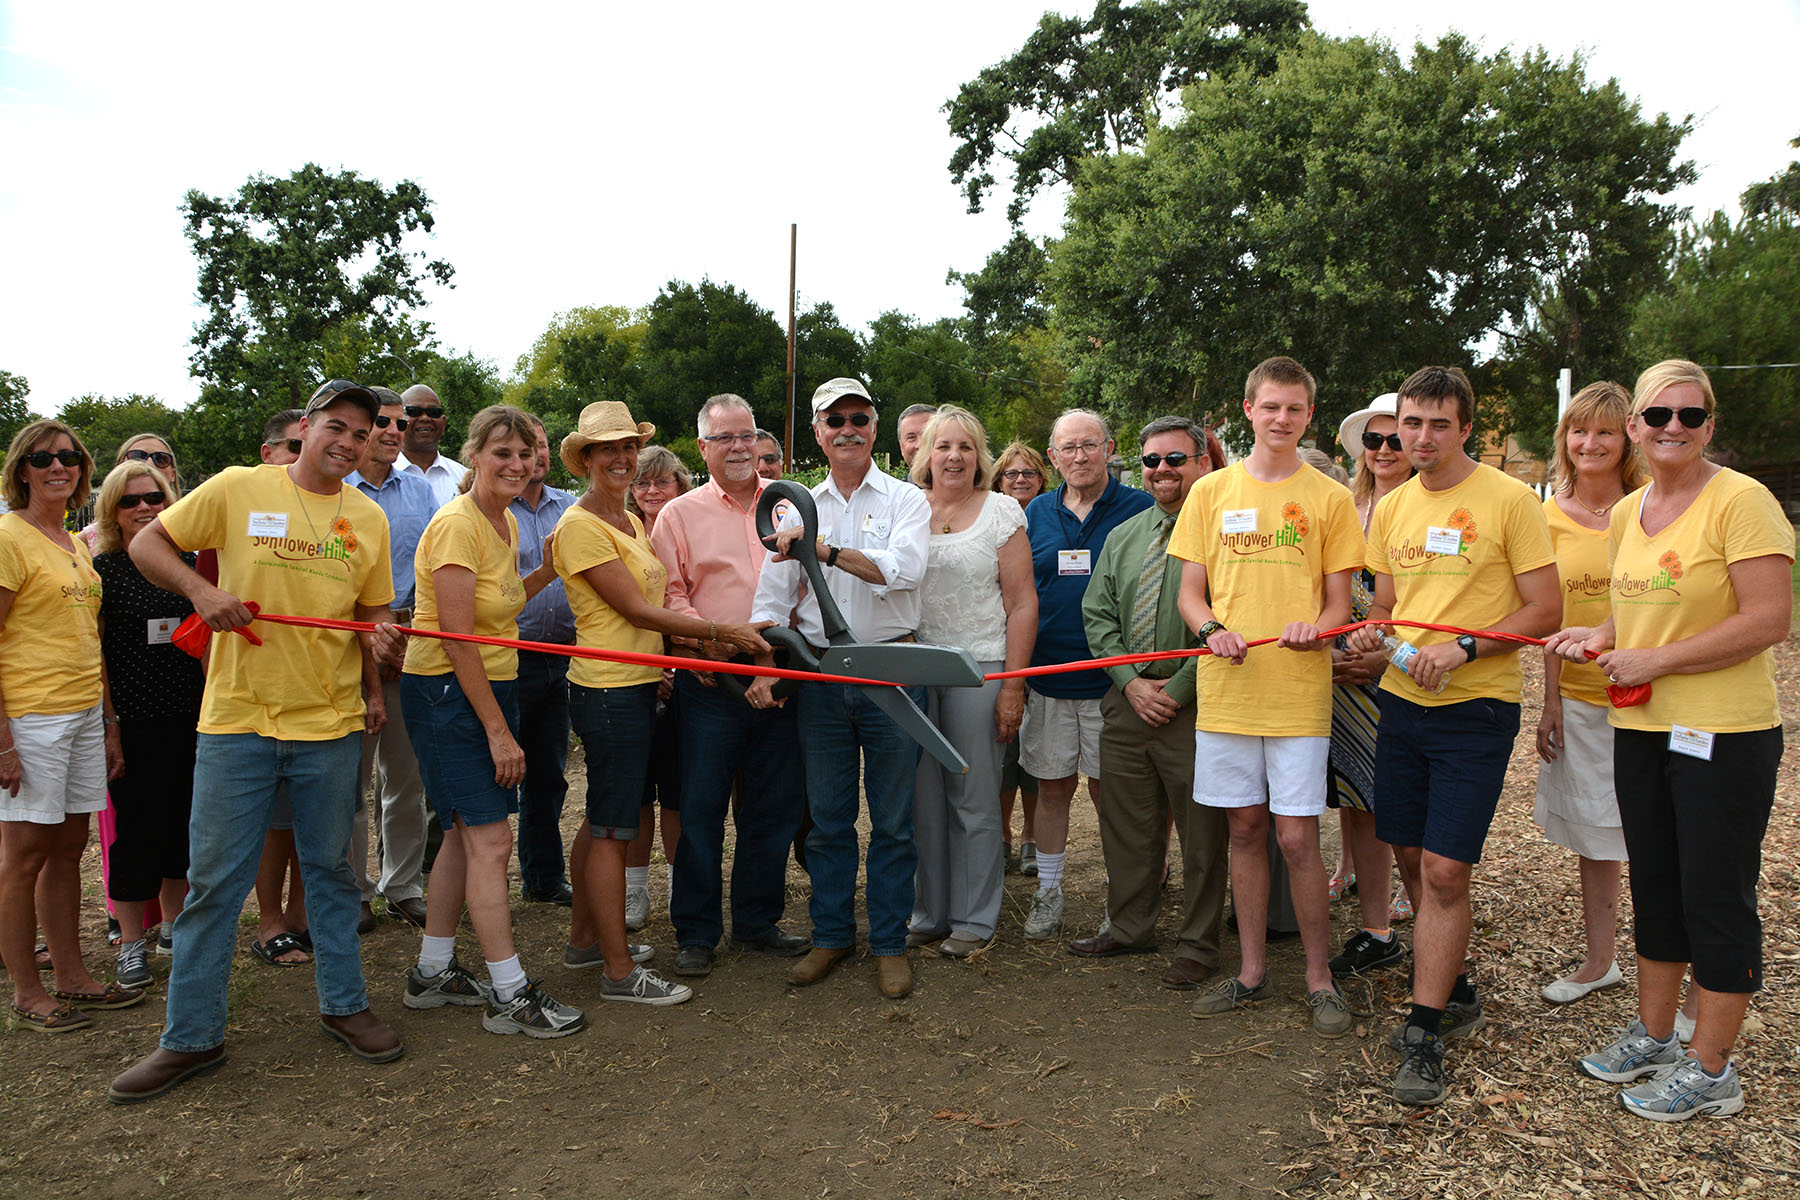 Sunflower Hill Ribbon Cutting Ceremony July 1, 2015